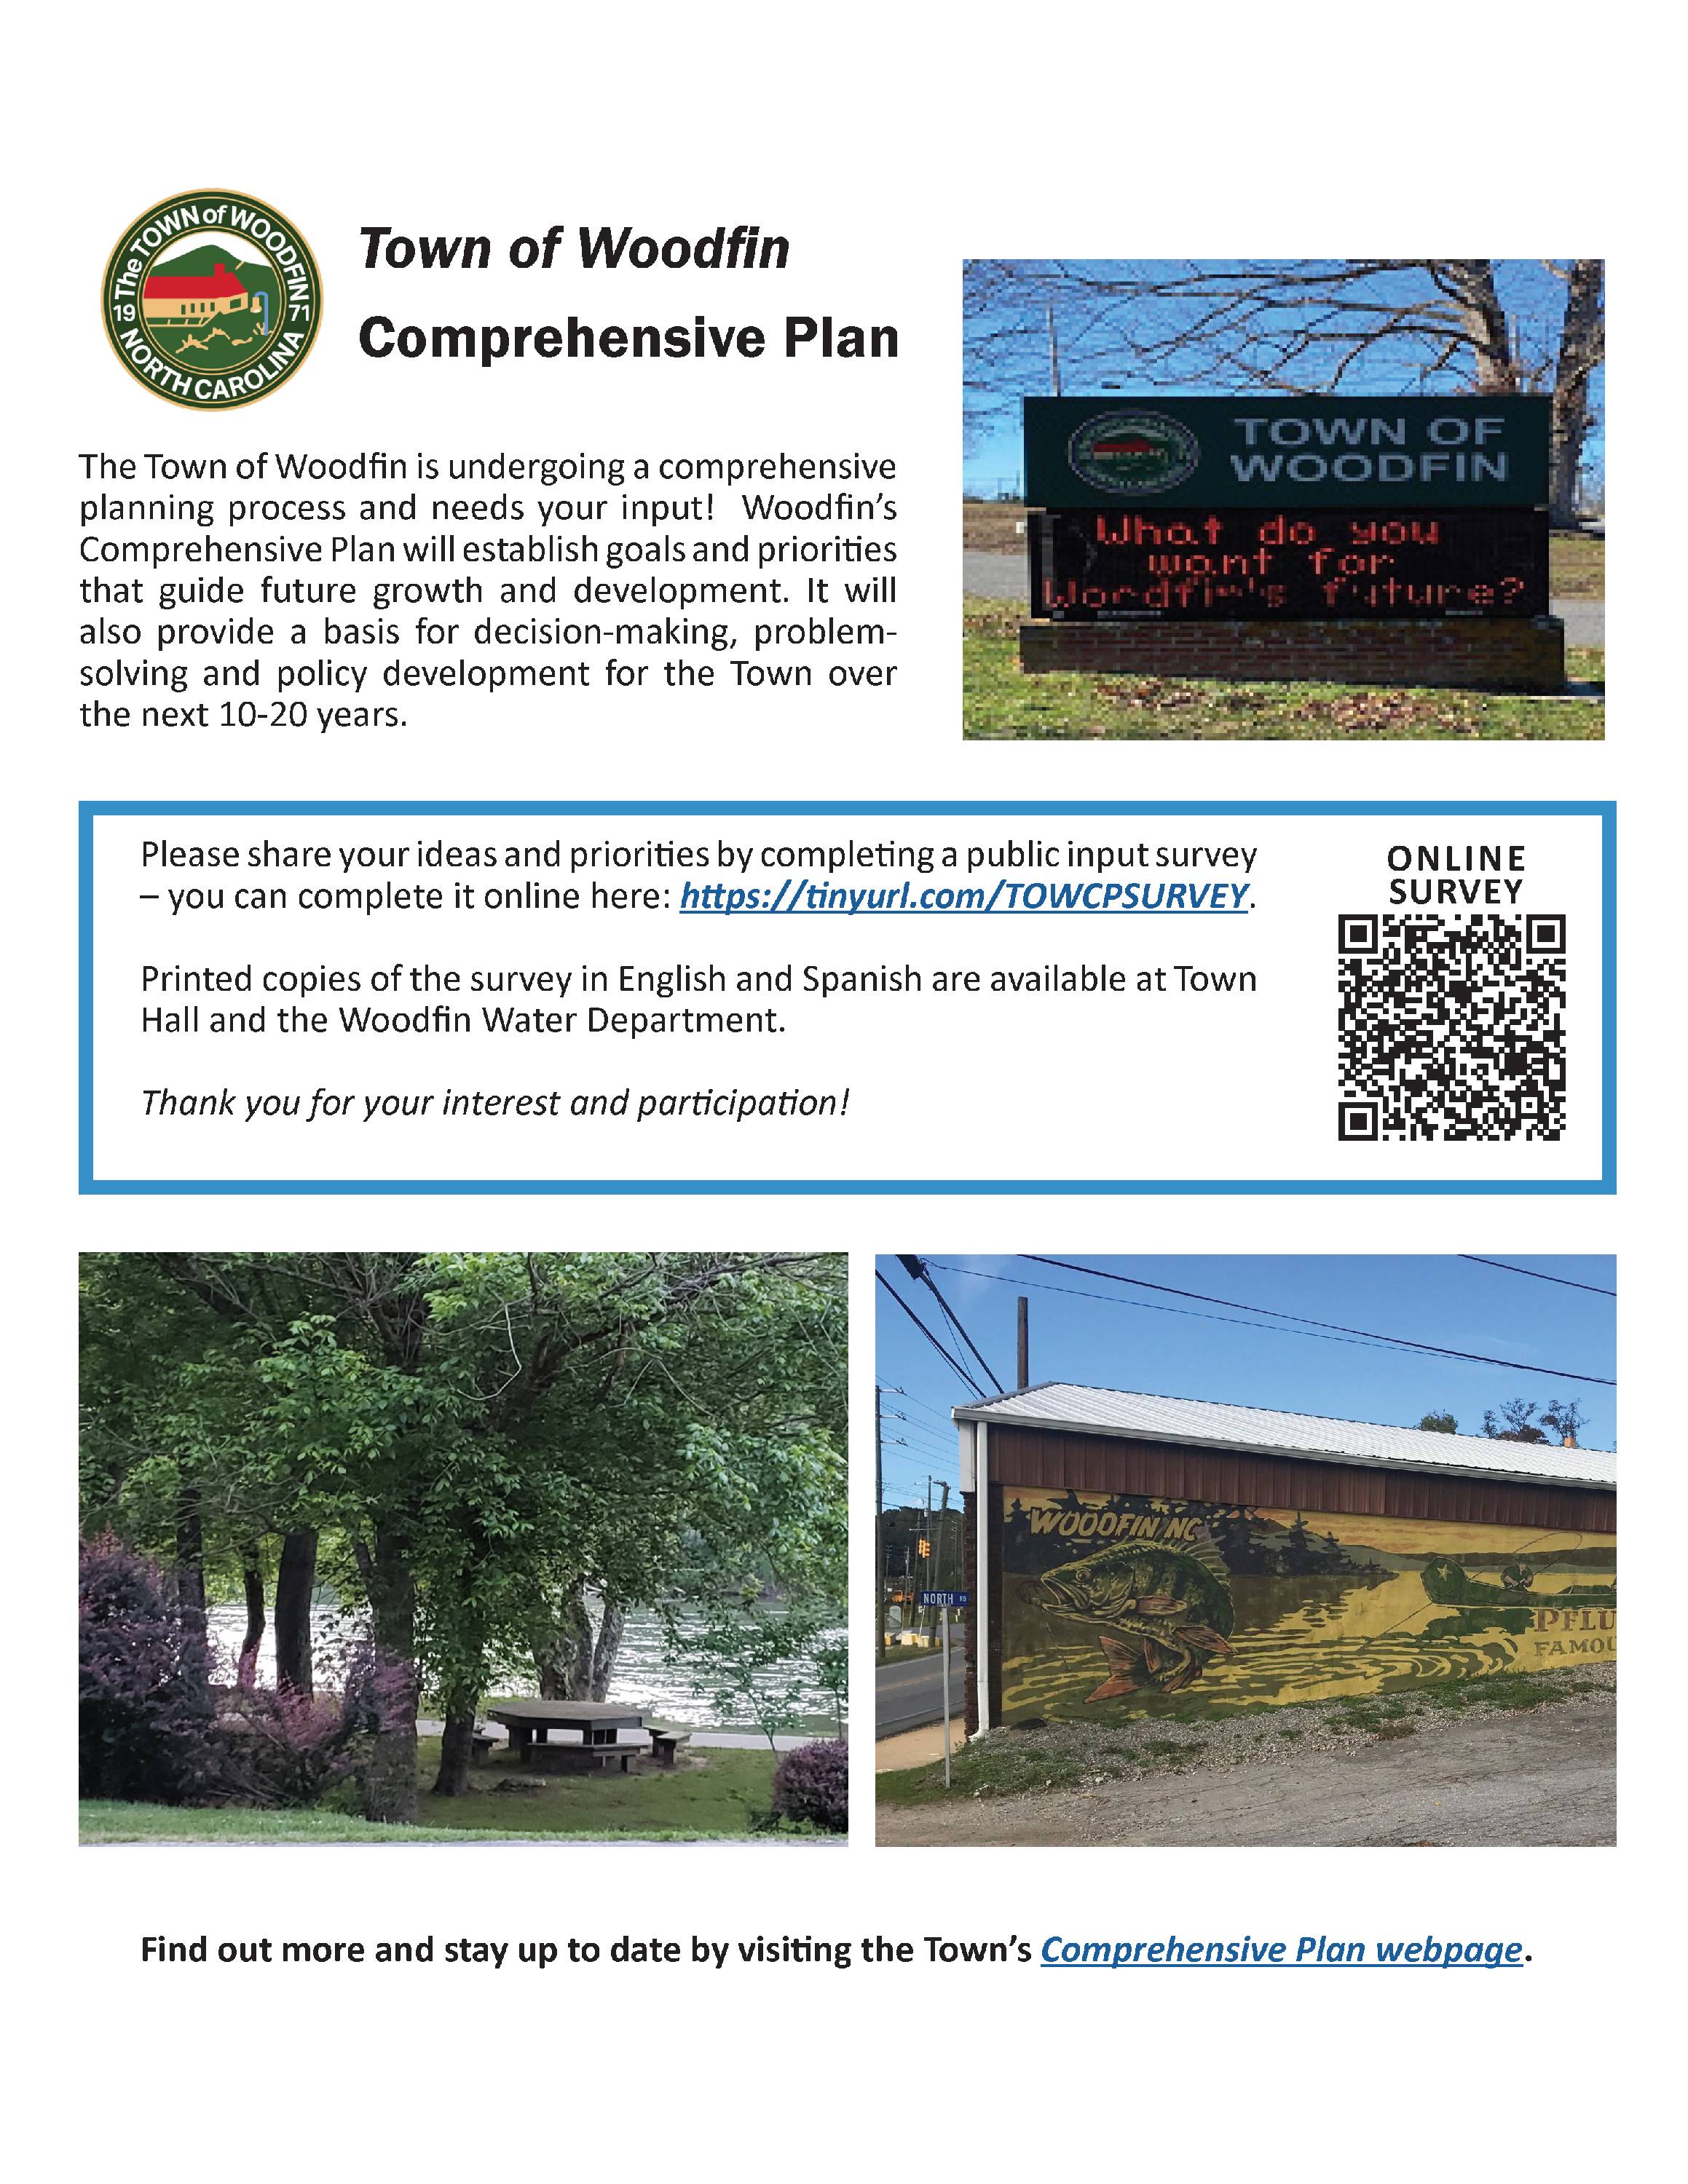 Woodfin Community Engagement Flyer_FINAL_2.10.22 - Copy